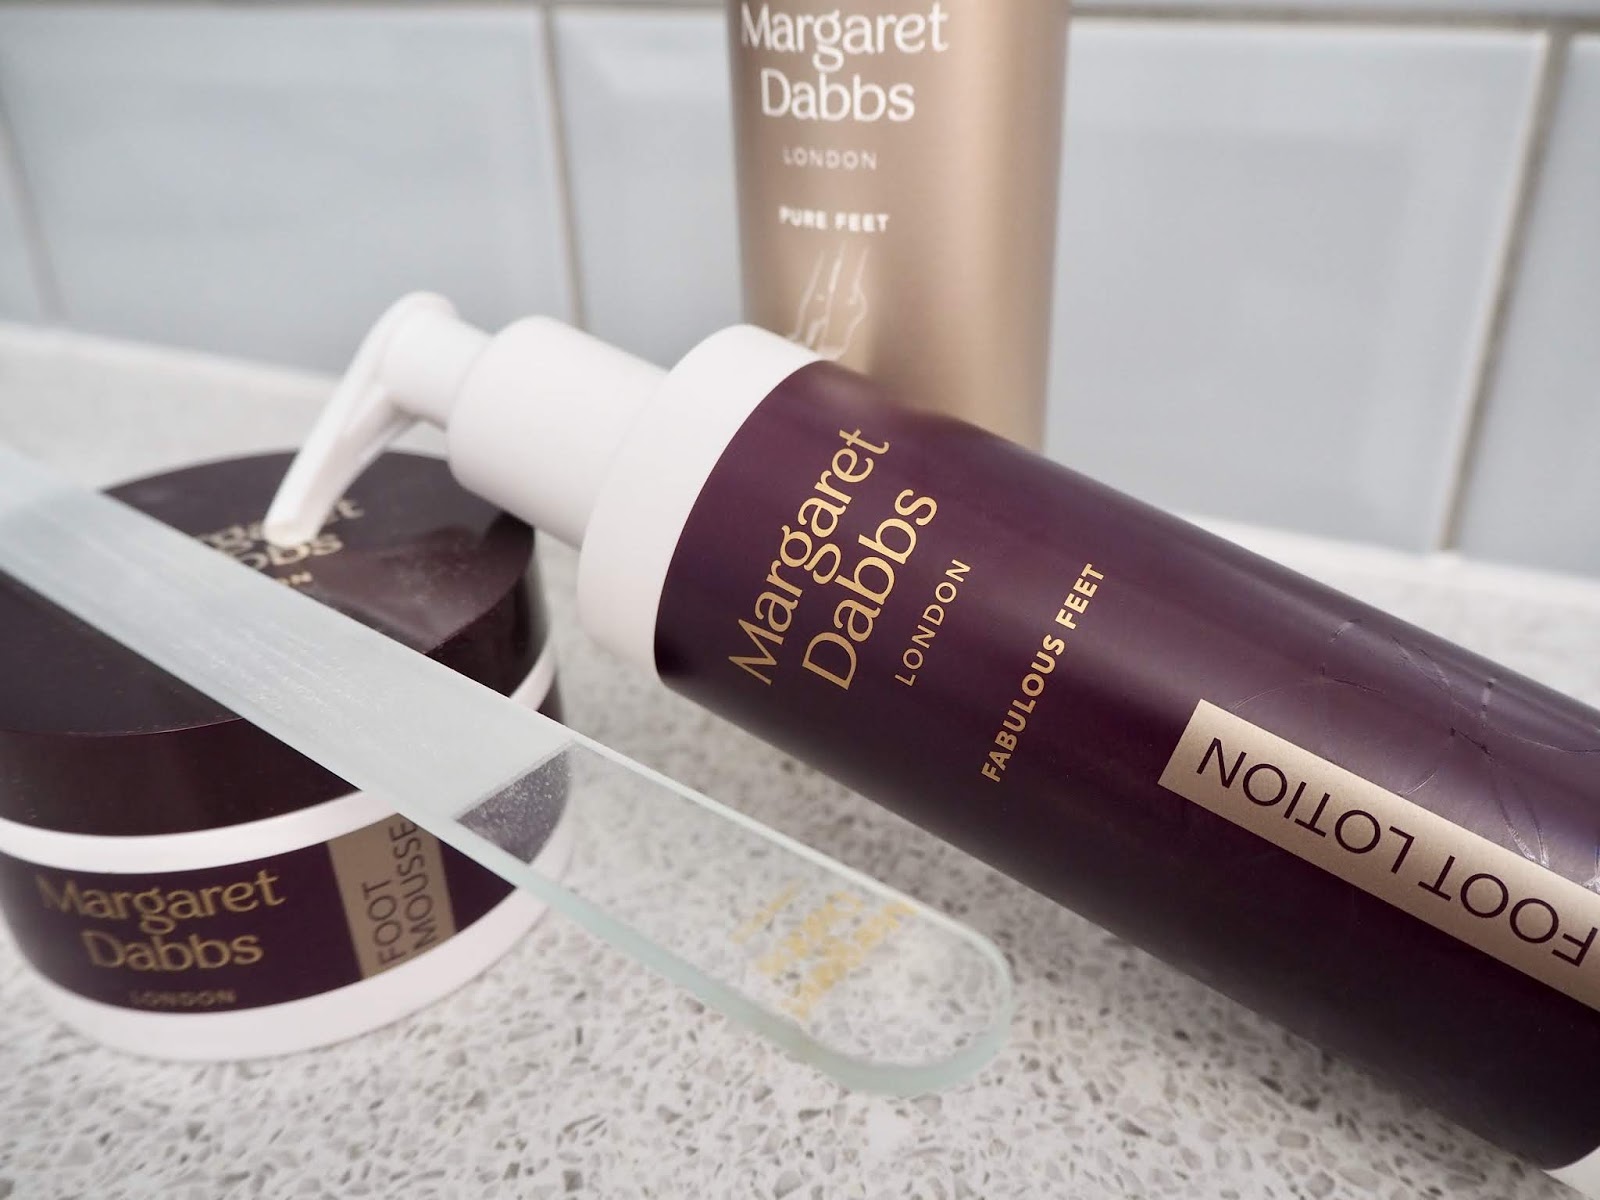 Margaret-Dabbs-London-Intensive-Hydrating-Foot-Lotion-review